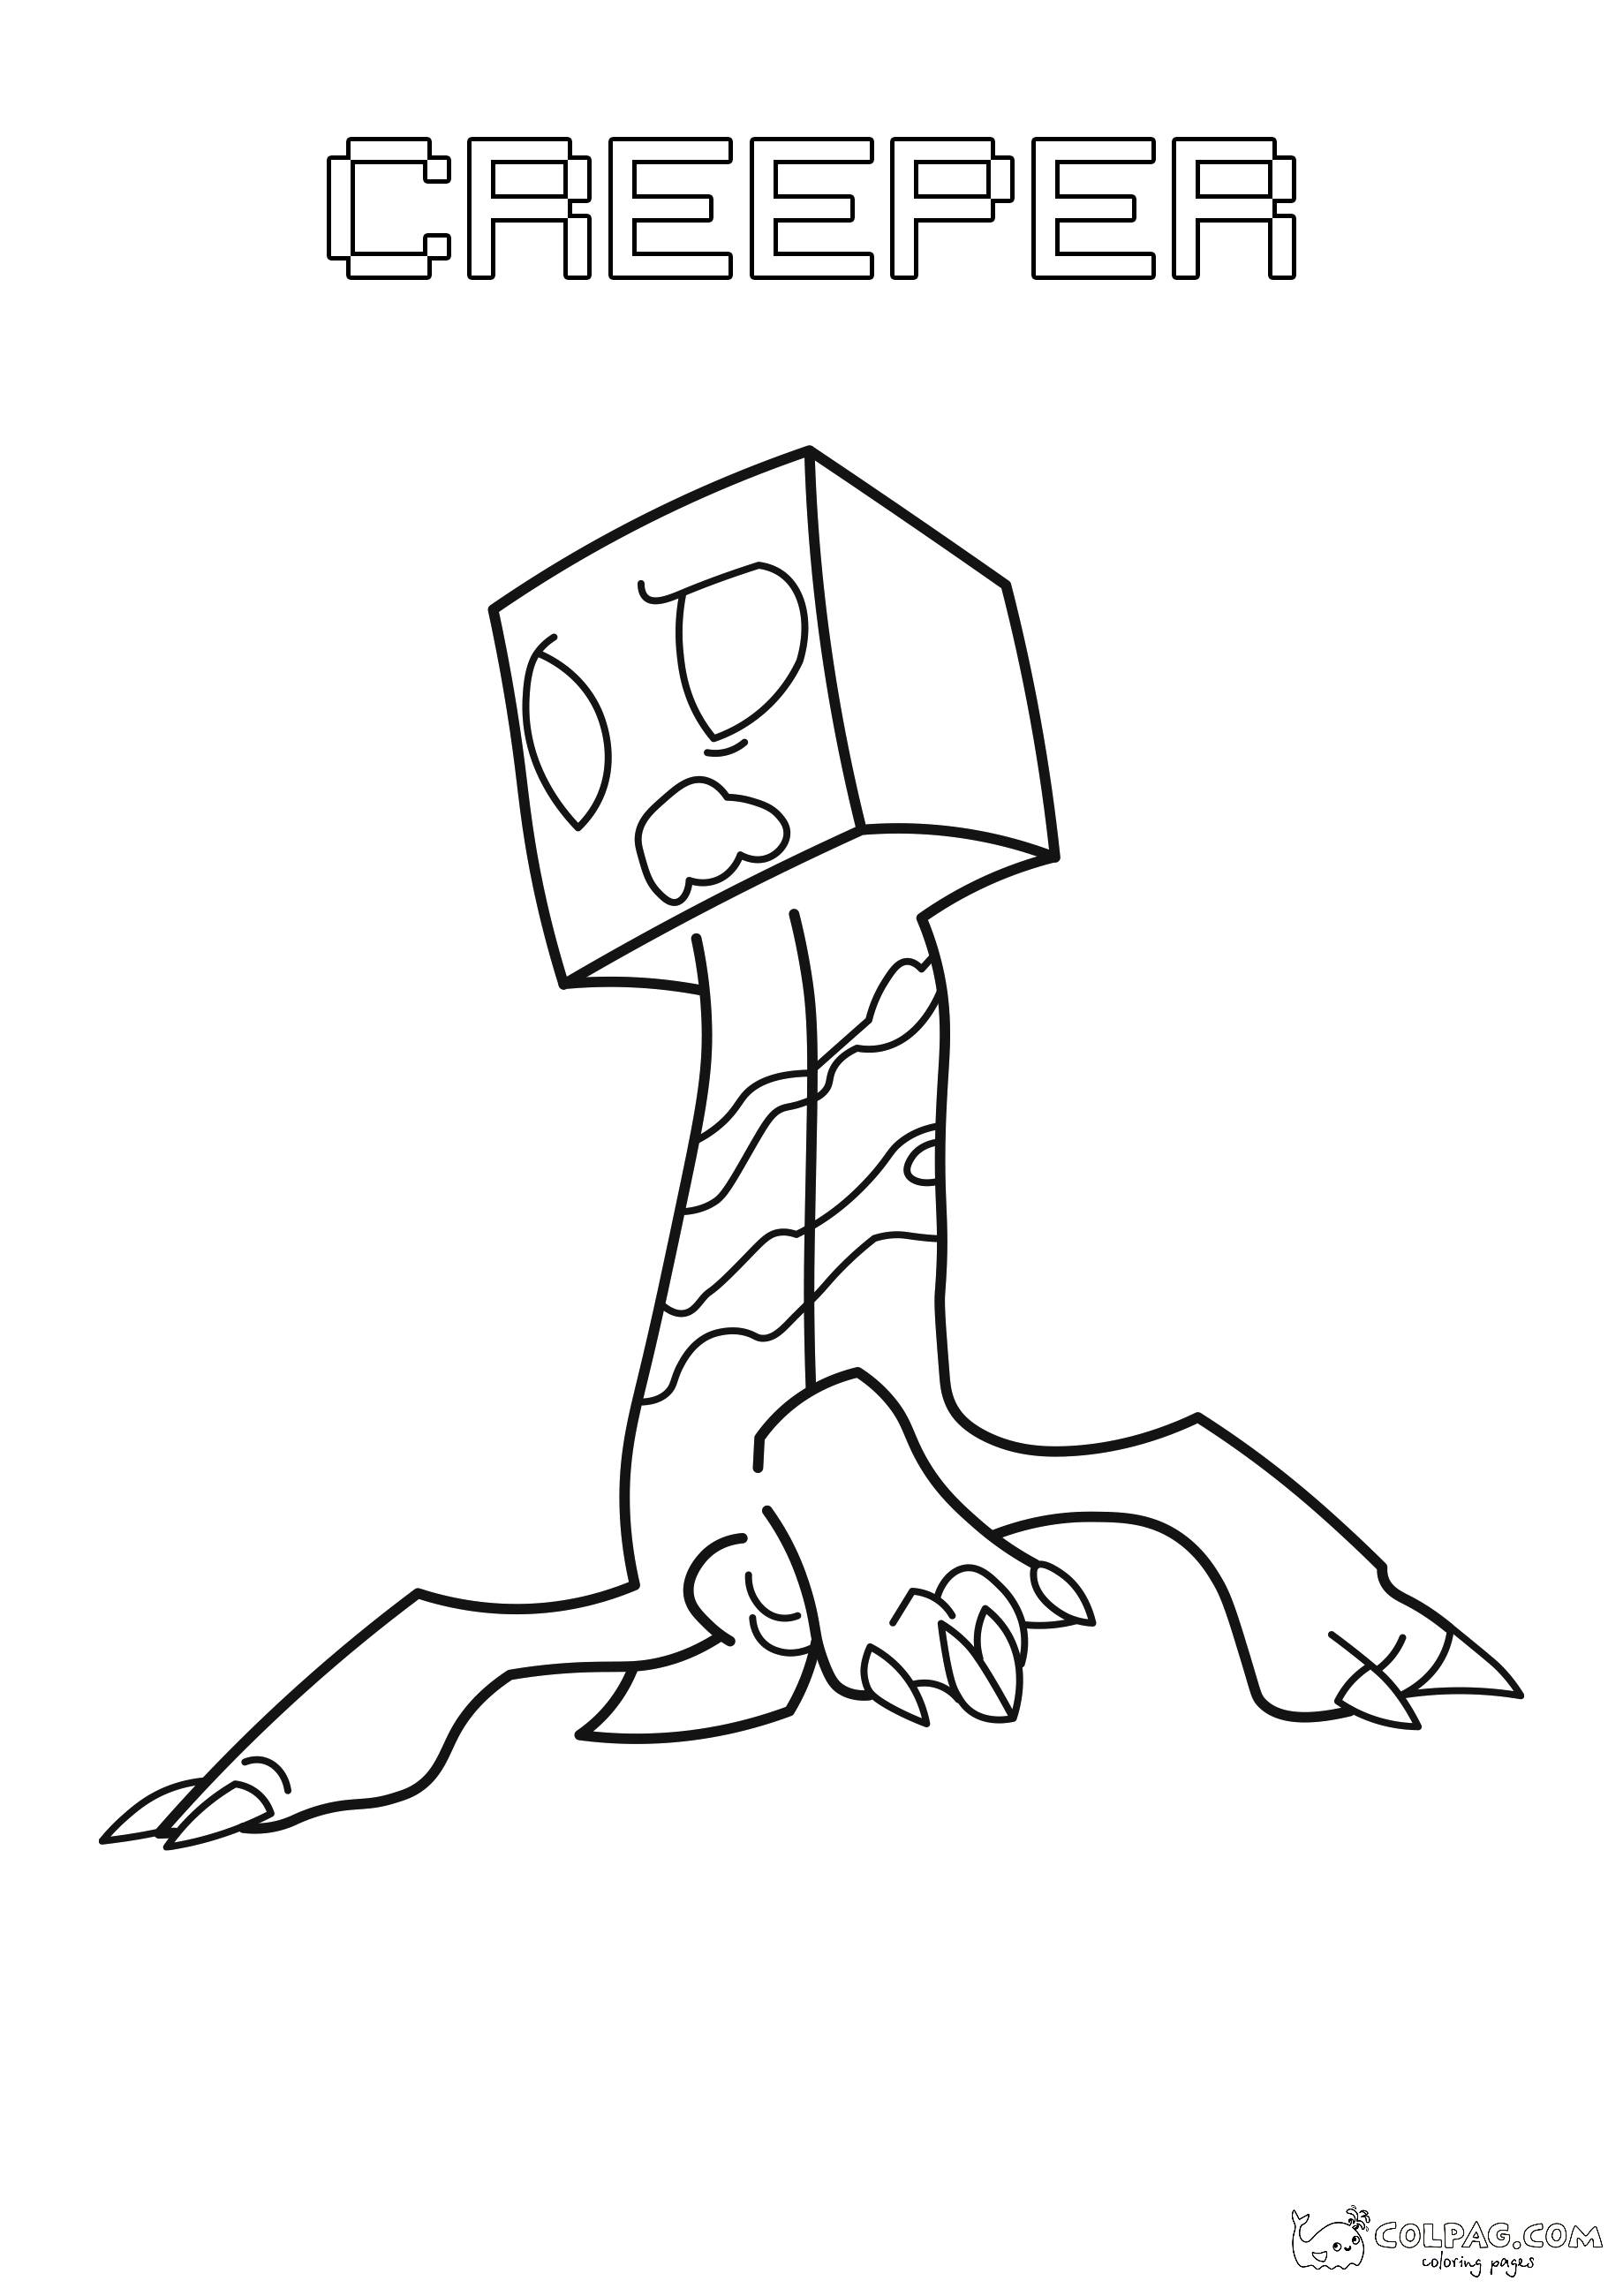 creeper-2-minecraft-coloring-page-colpag